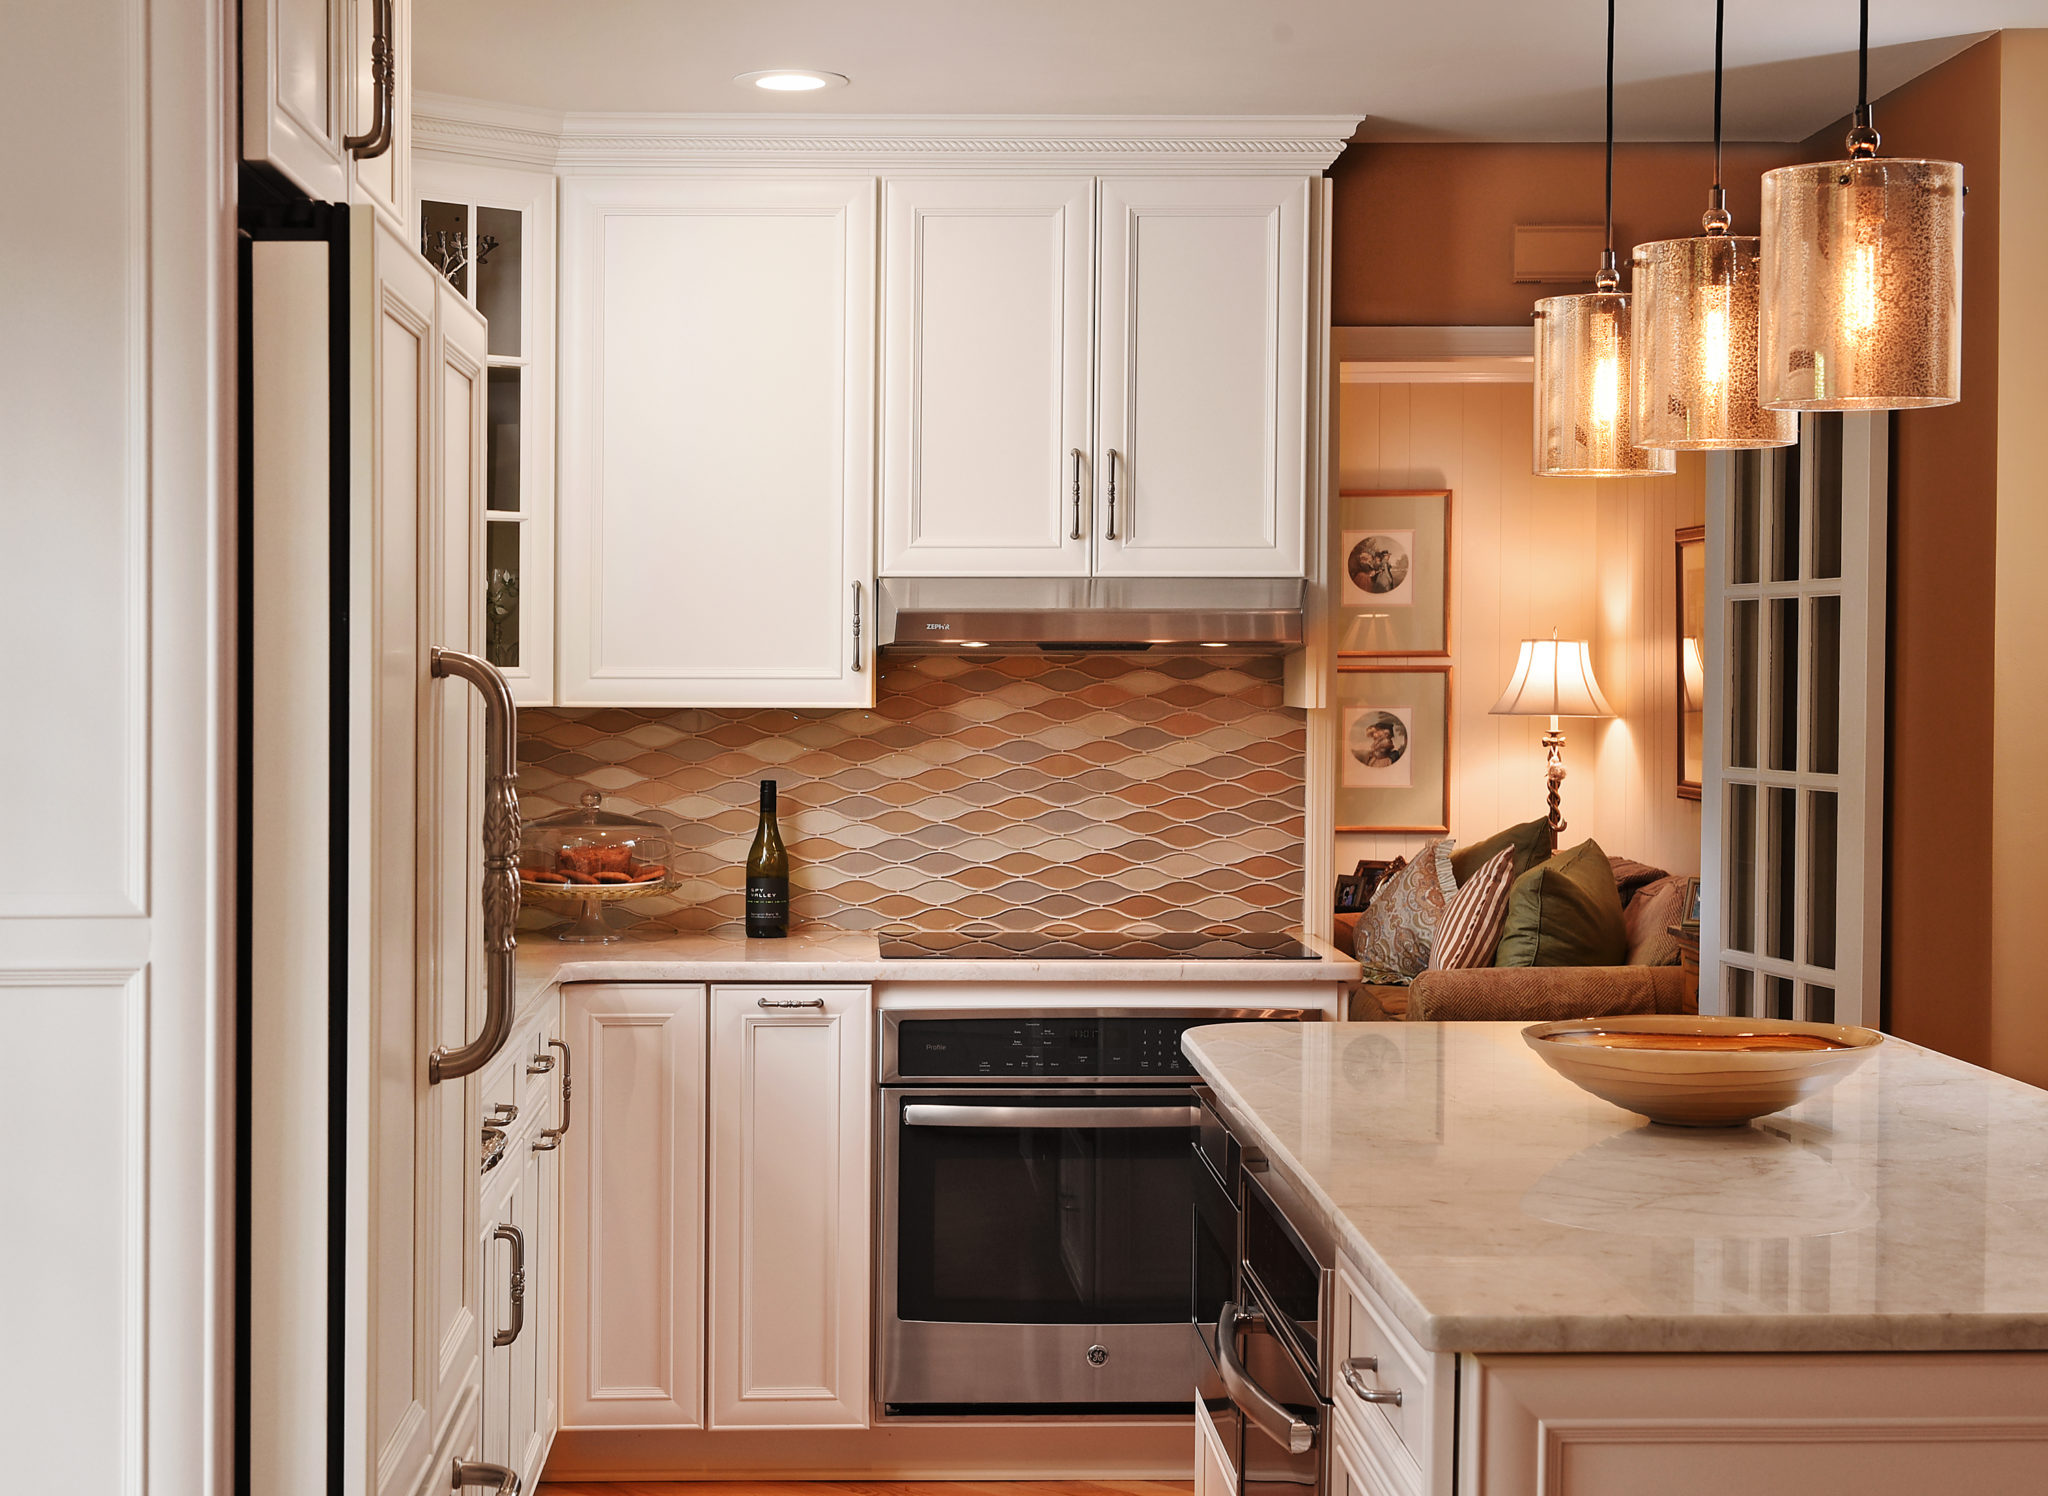 Creatice Is Kitchen Refacing Worth It for Small Space